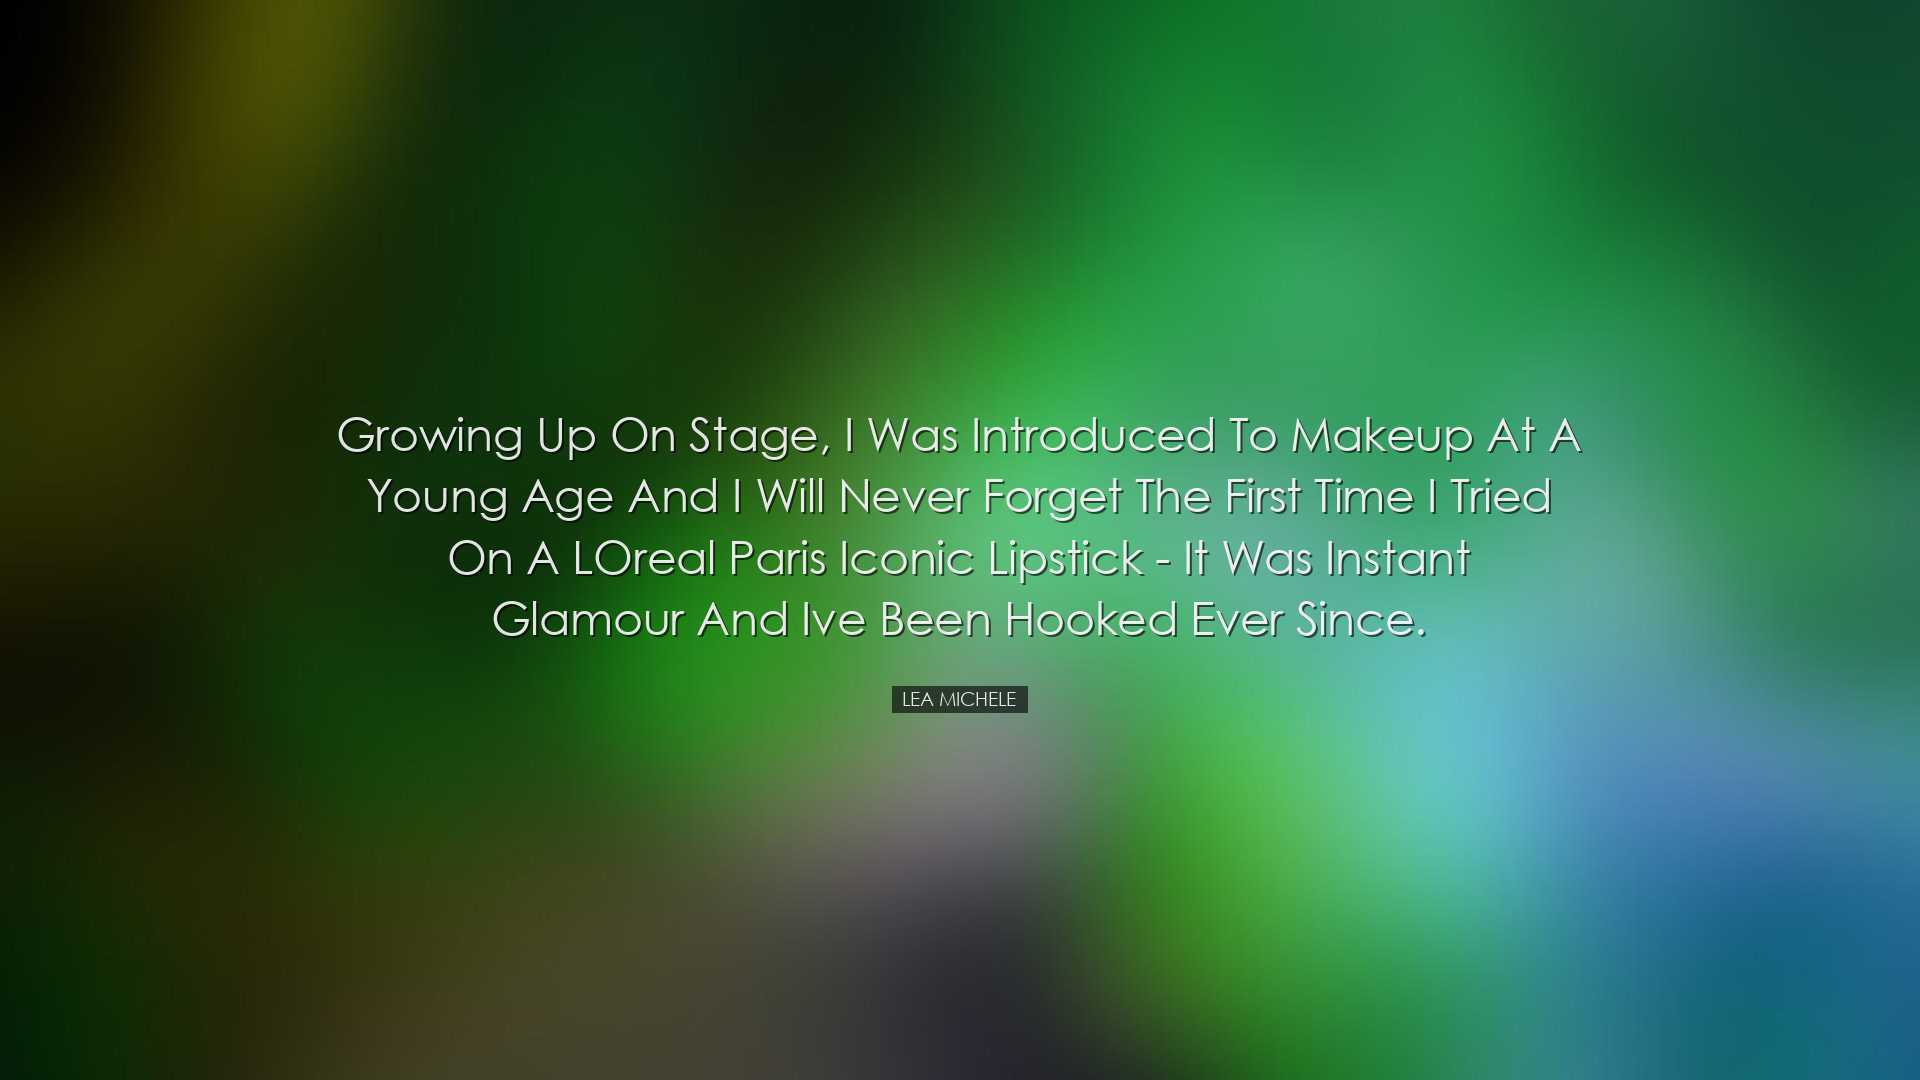 Growing up on stage, I was introduced to makeup at a young age and